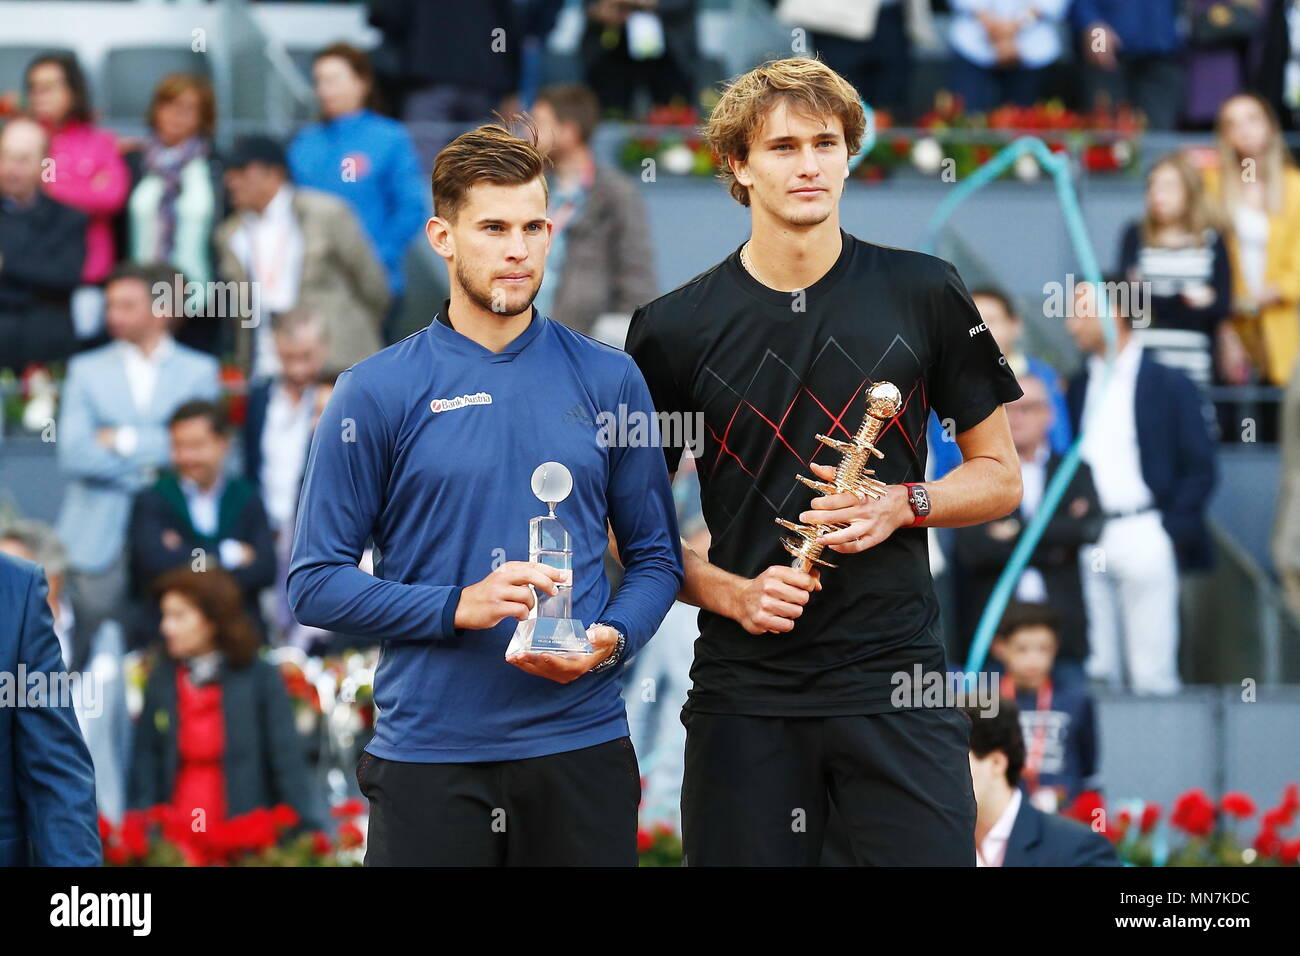 Madrid, Spain, May 13, 2018. 13th May, 2018. (L-R) Dominic Thiem (AUT),  Alexander Zverev (GER) Tennis : Alexander Zverev of Germany and Dominic  Thiem of Austria after singles final round match on